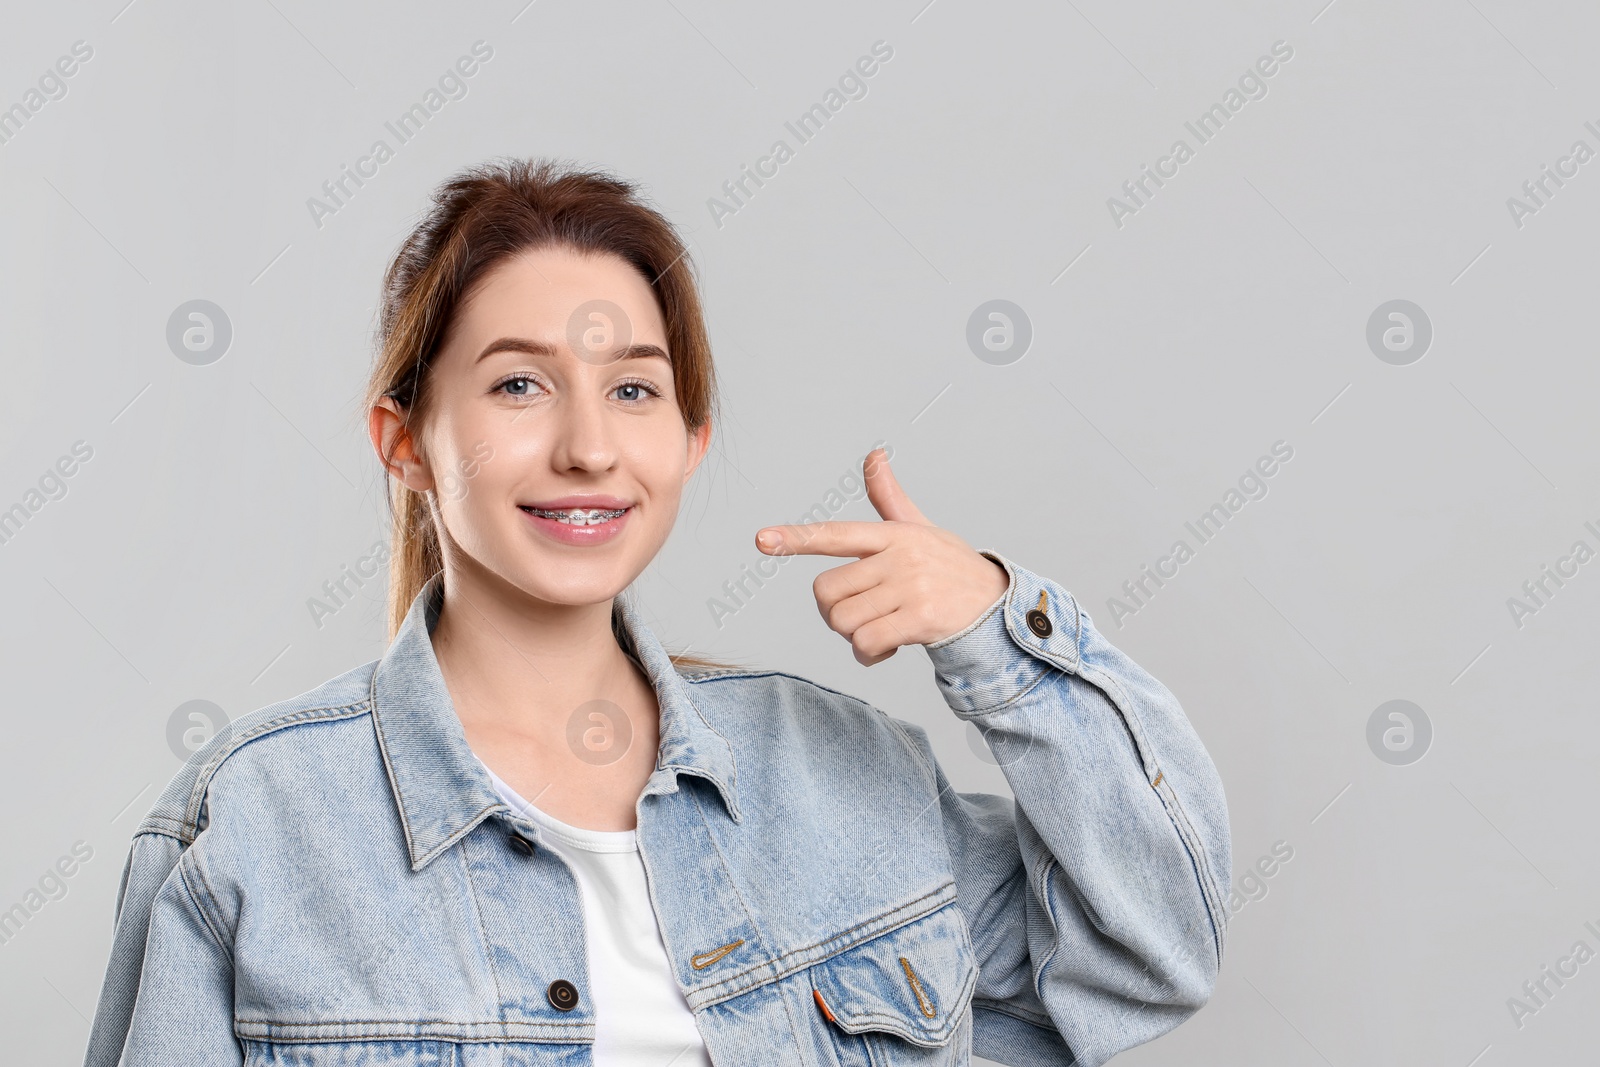 Photo of Portrait of smiling woman pointing at her dental braces on grey background